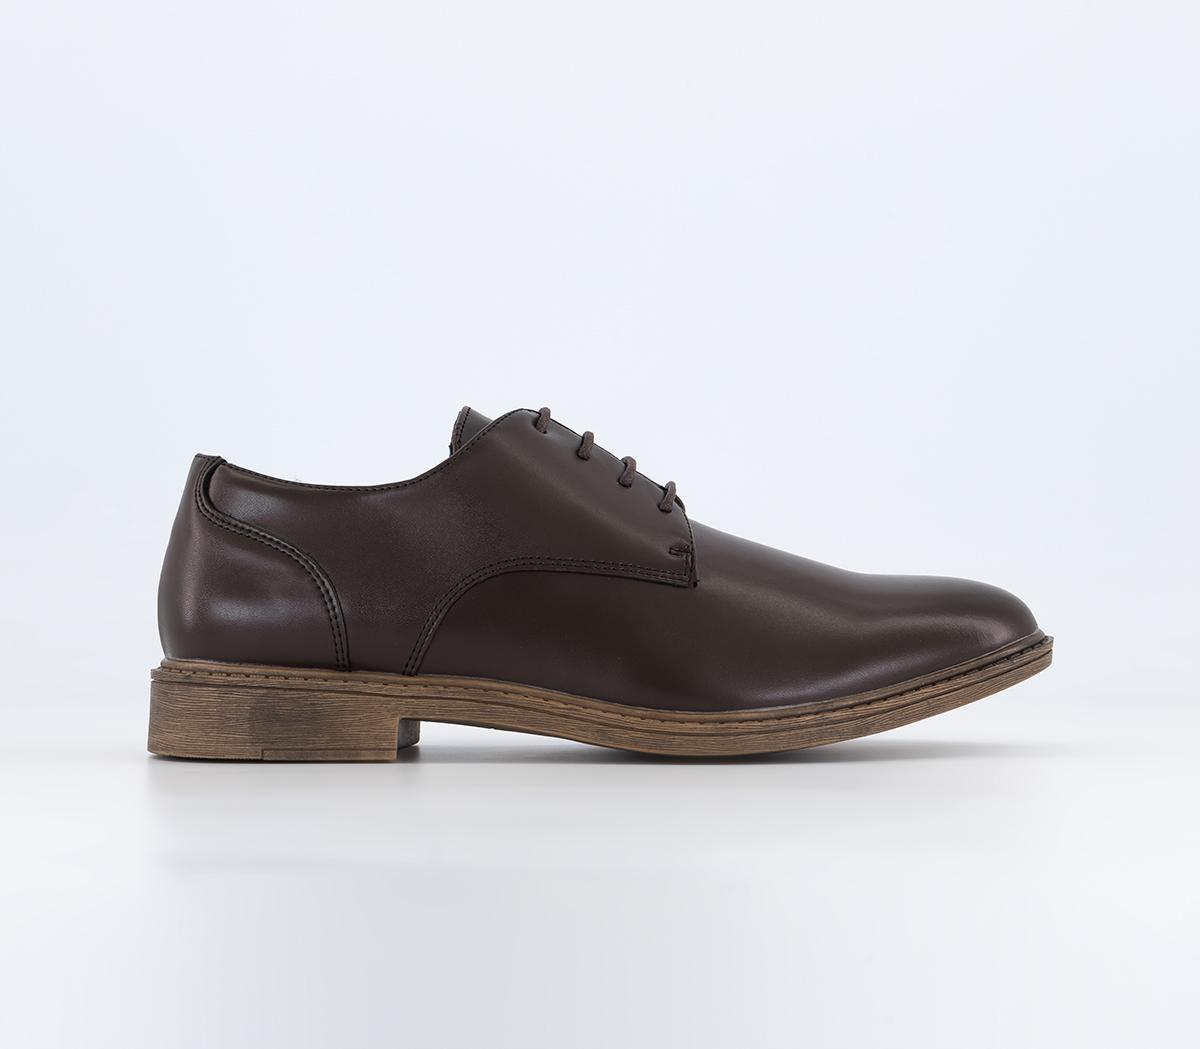 OFFICECurton Leather Derby ShoesBrown Leather